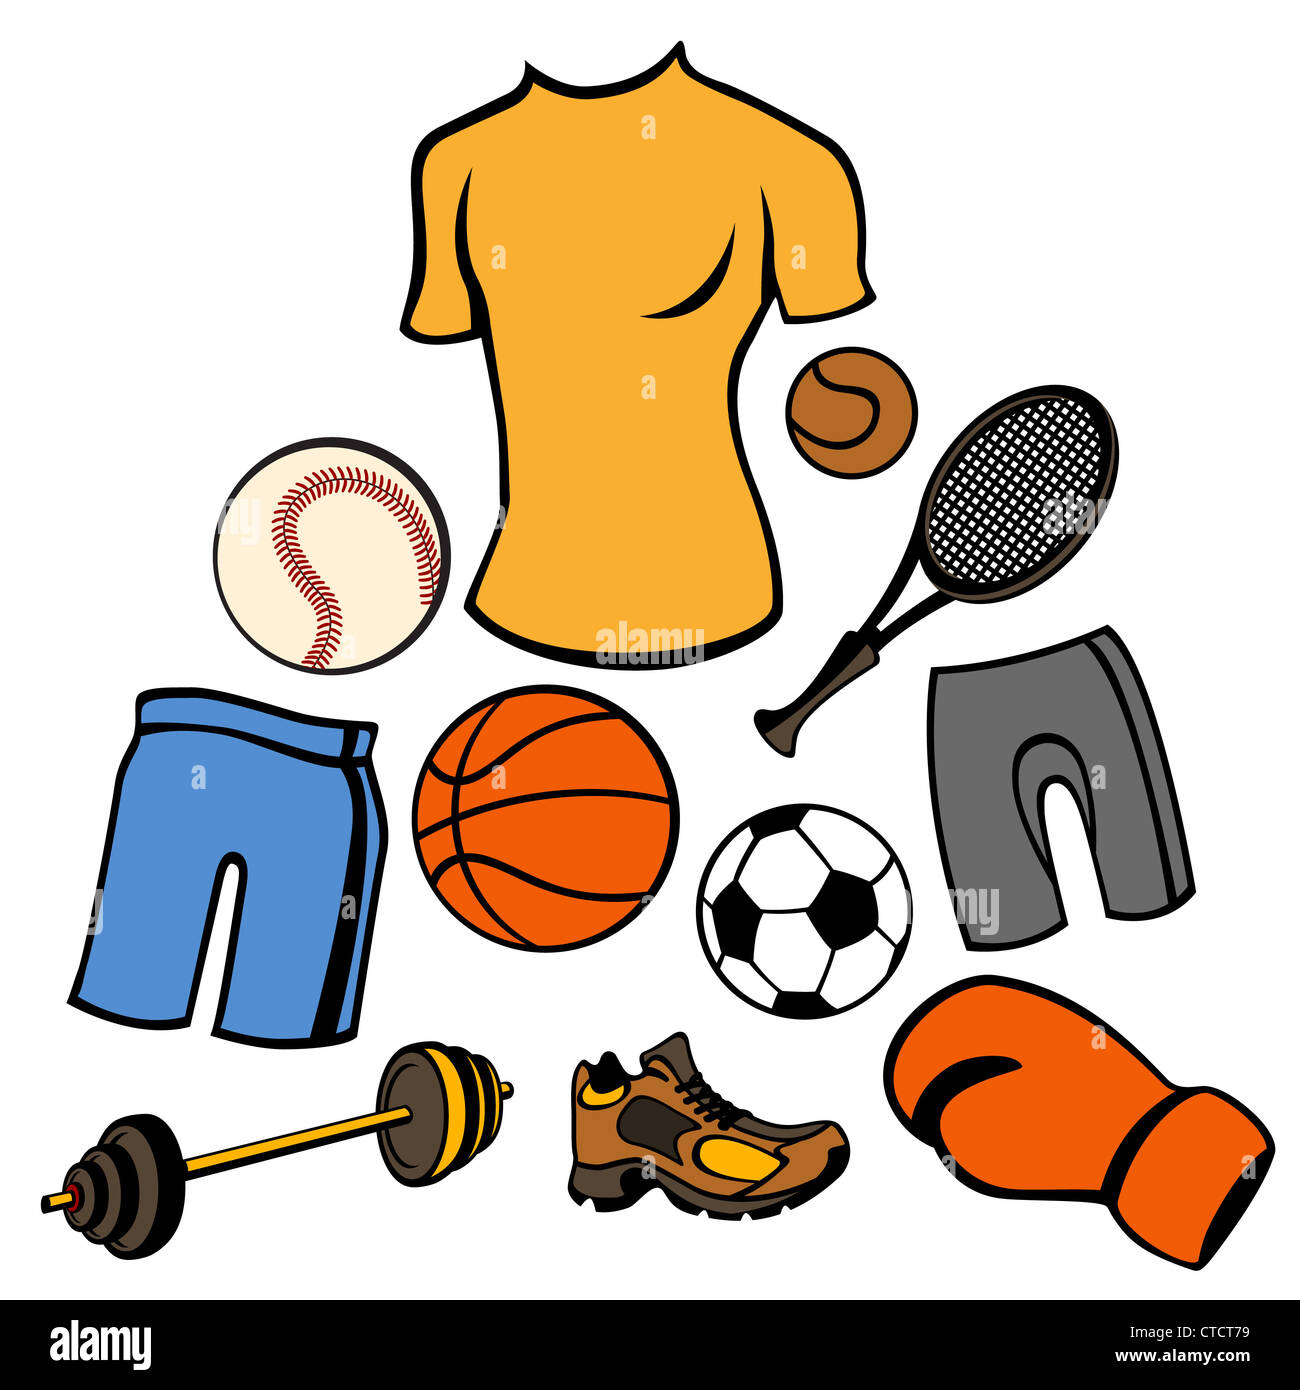 Vector illustration of man accessories set related to sport life style  Stock Photo - Alamy